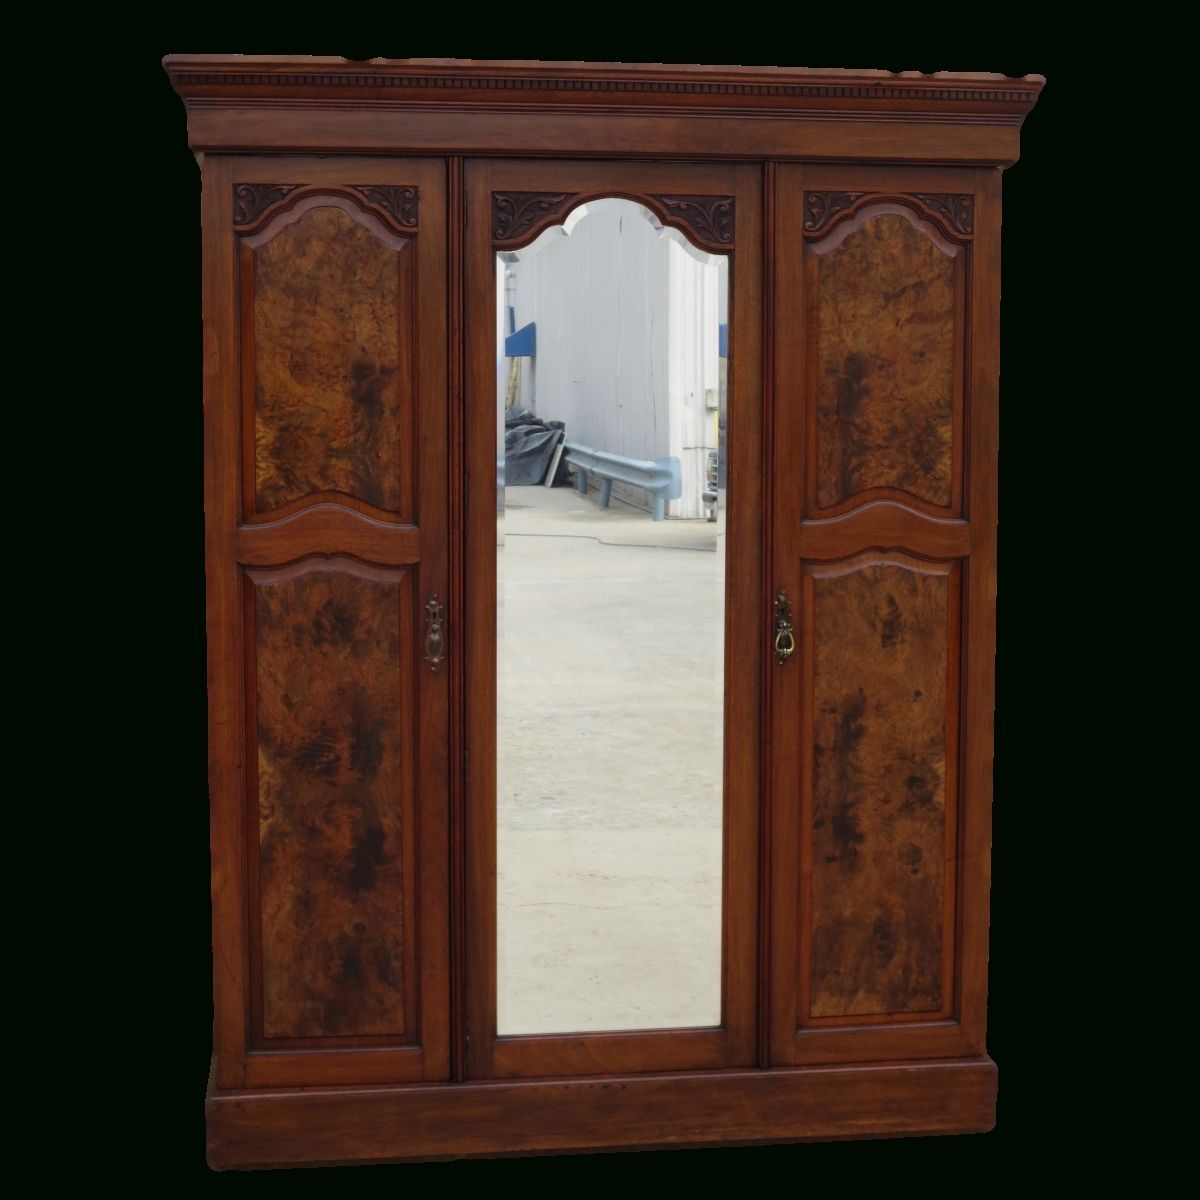 Antique Armoires, Antique Wardrobes, And Antique Furniture From In Antique Wardrobes (Photo 15 of 15)